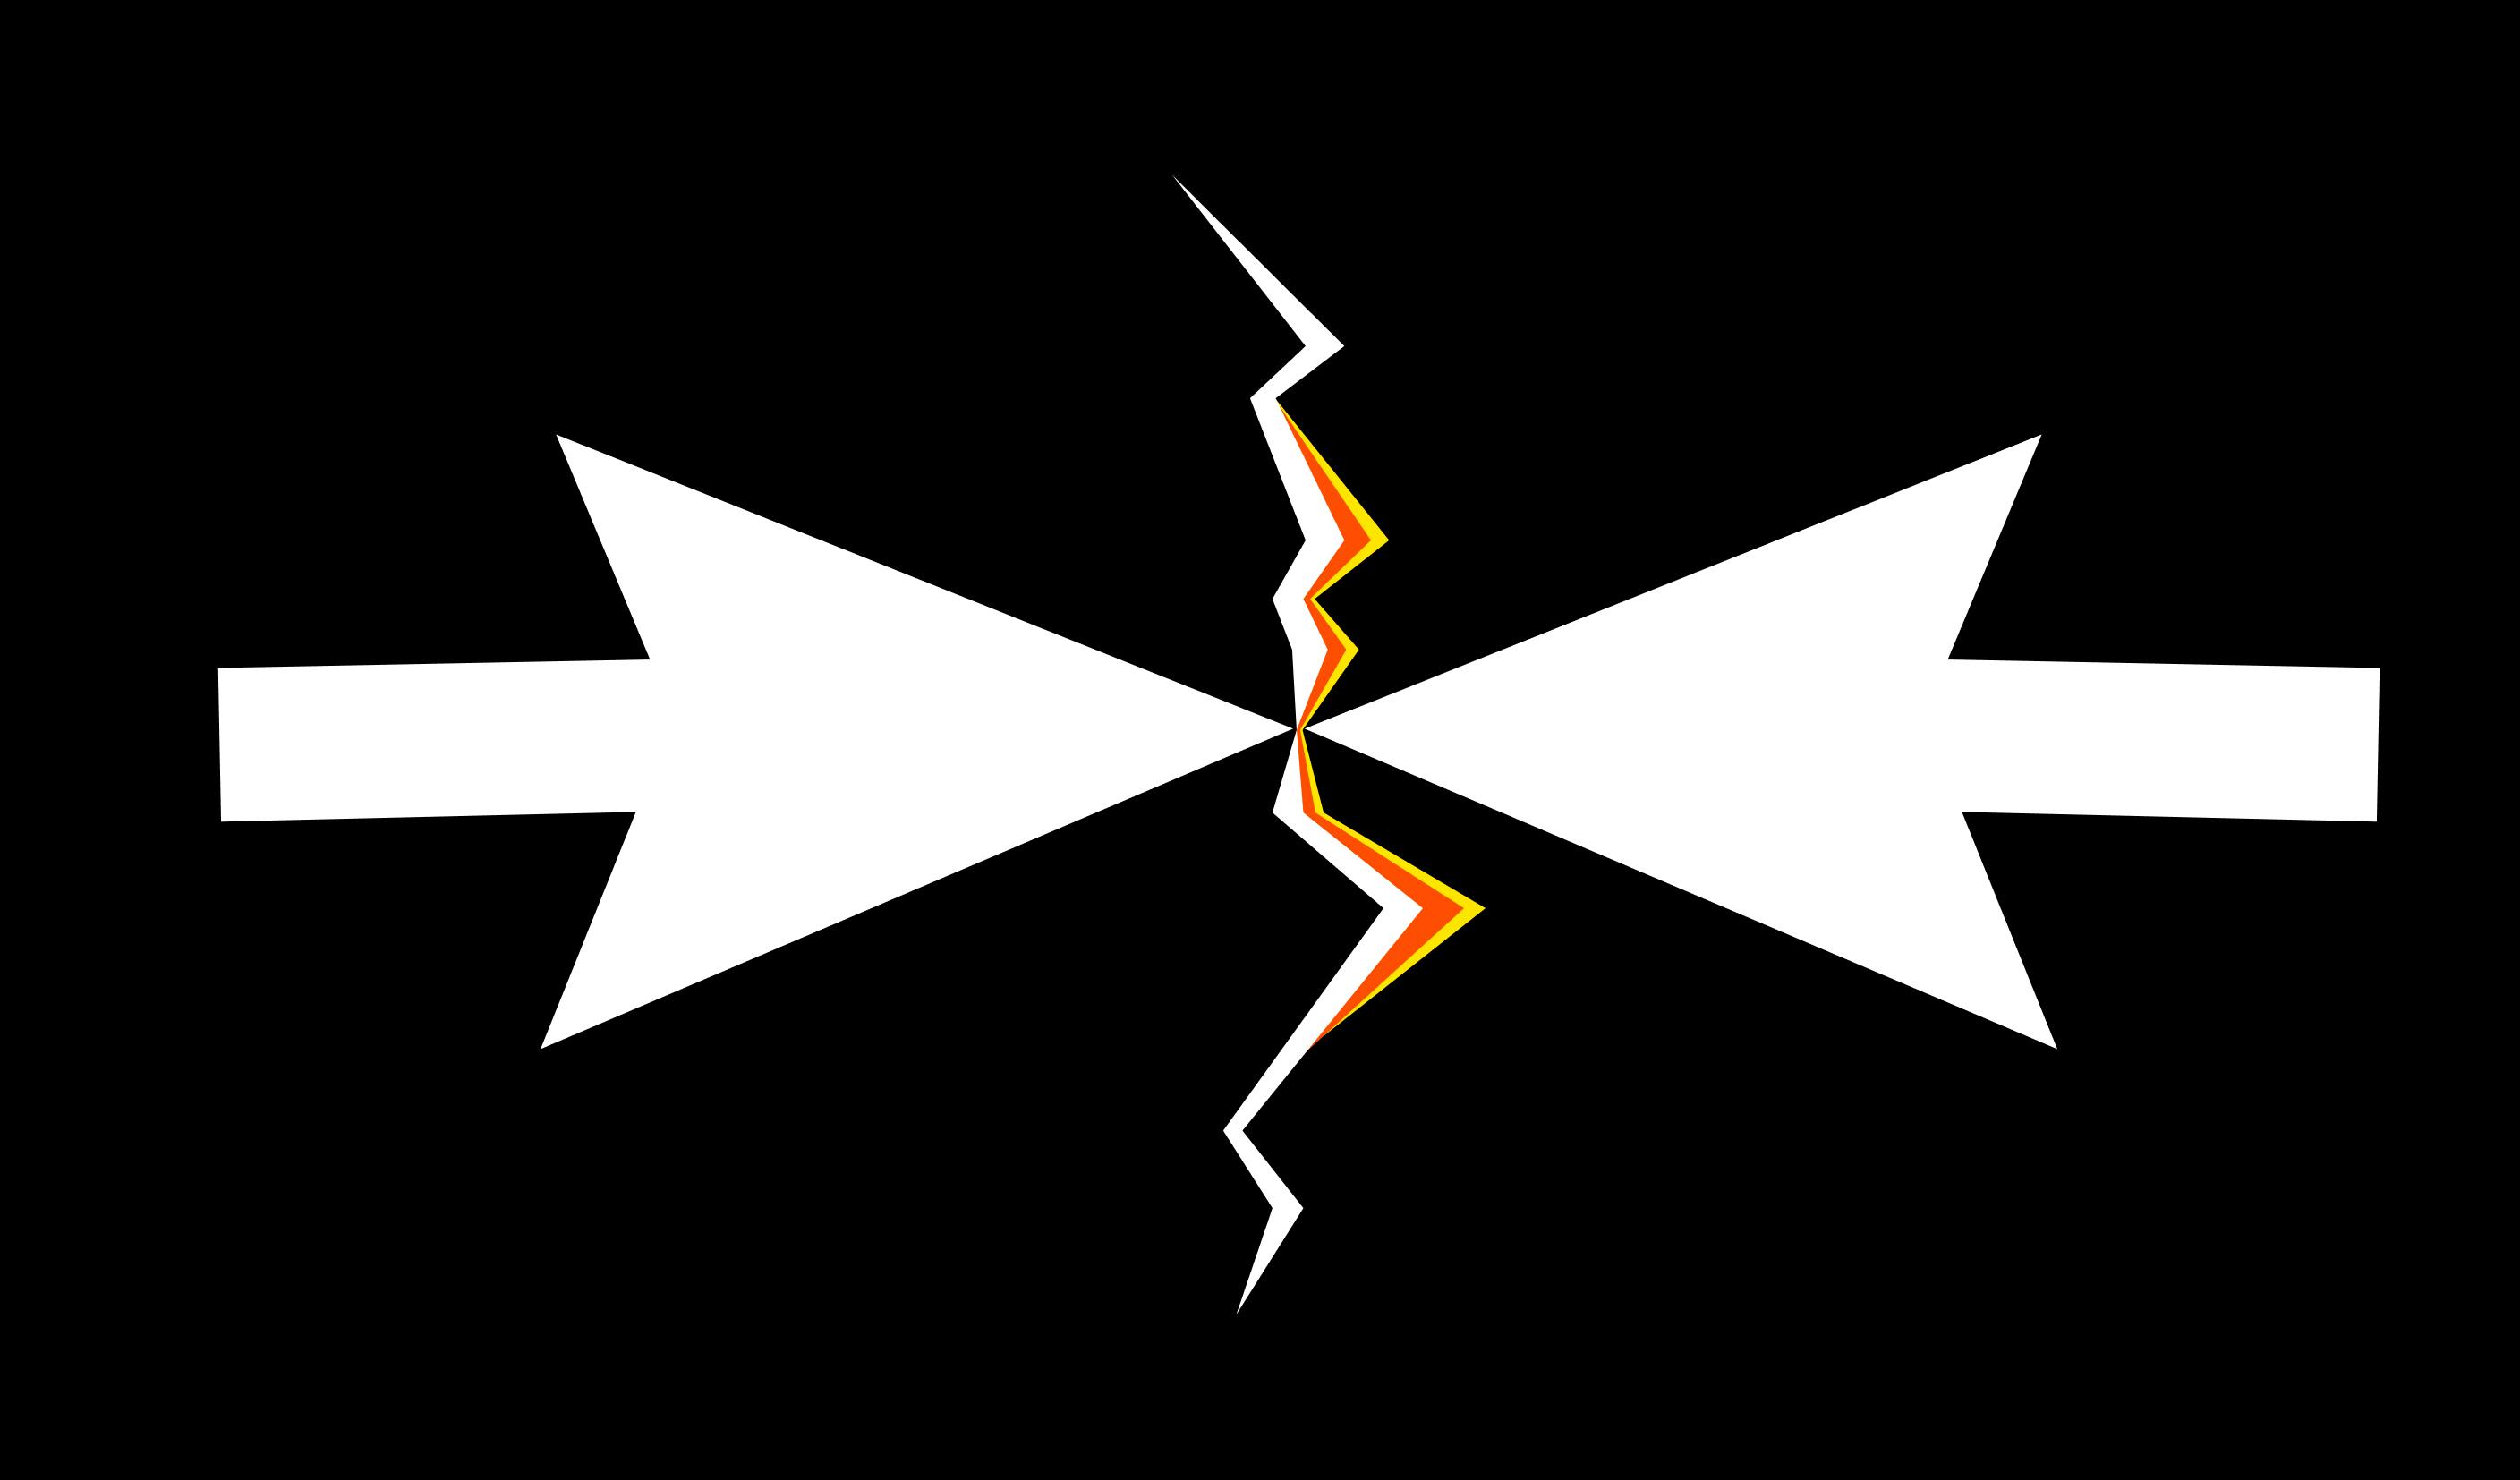 two cursors clashing and opening a crack